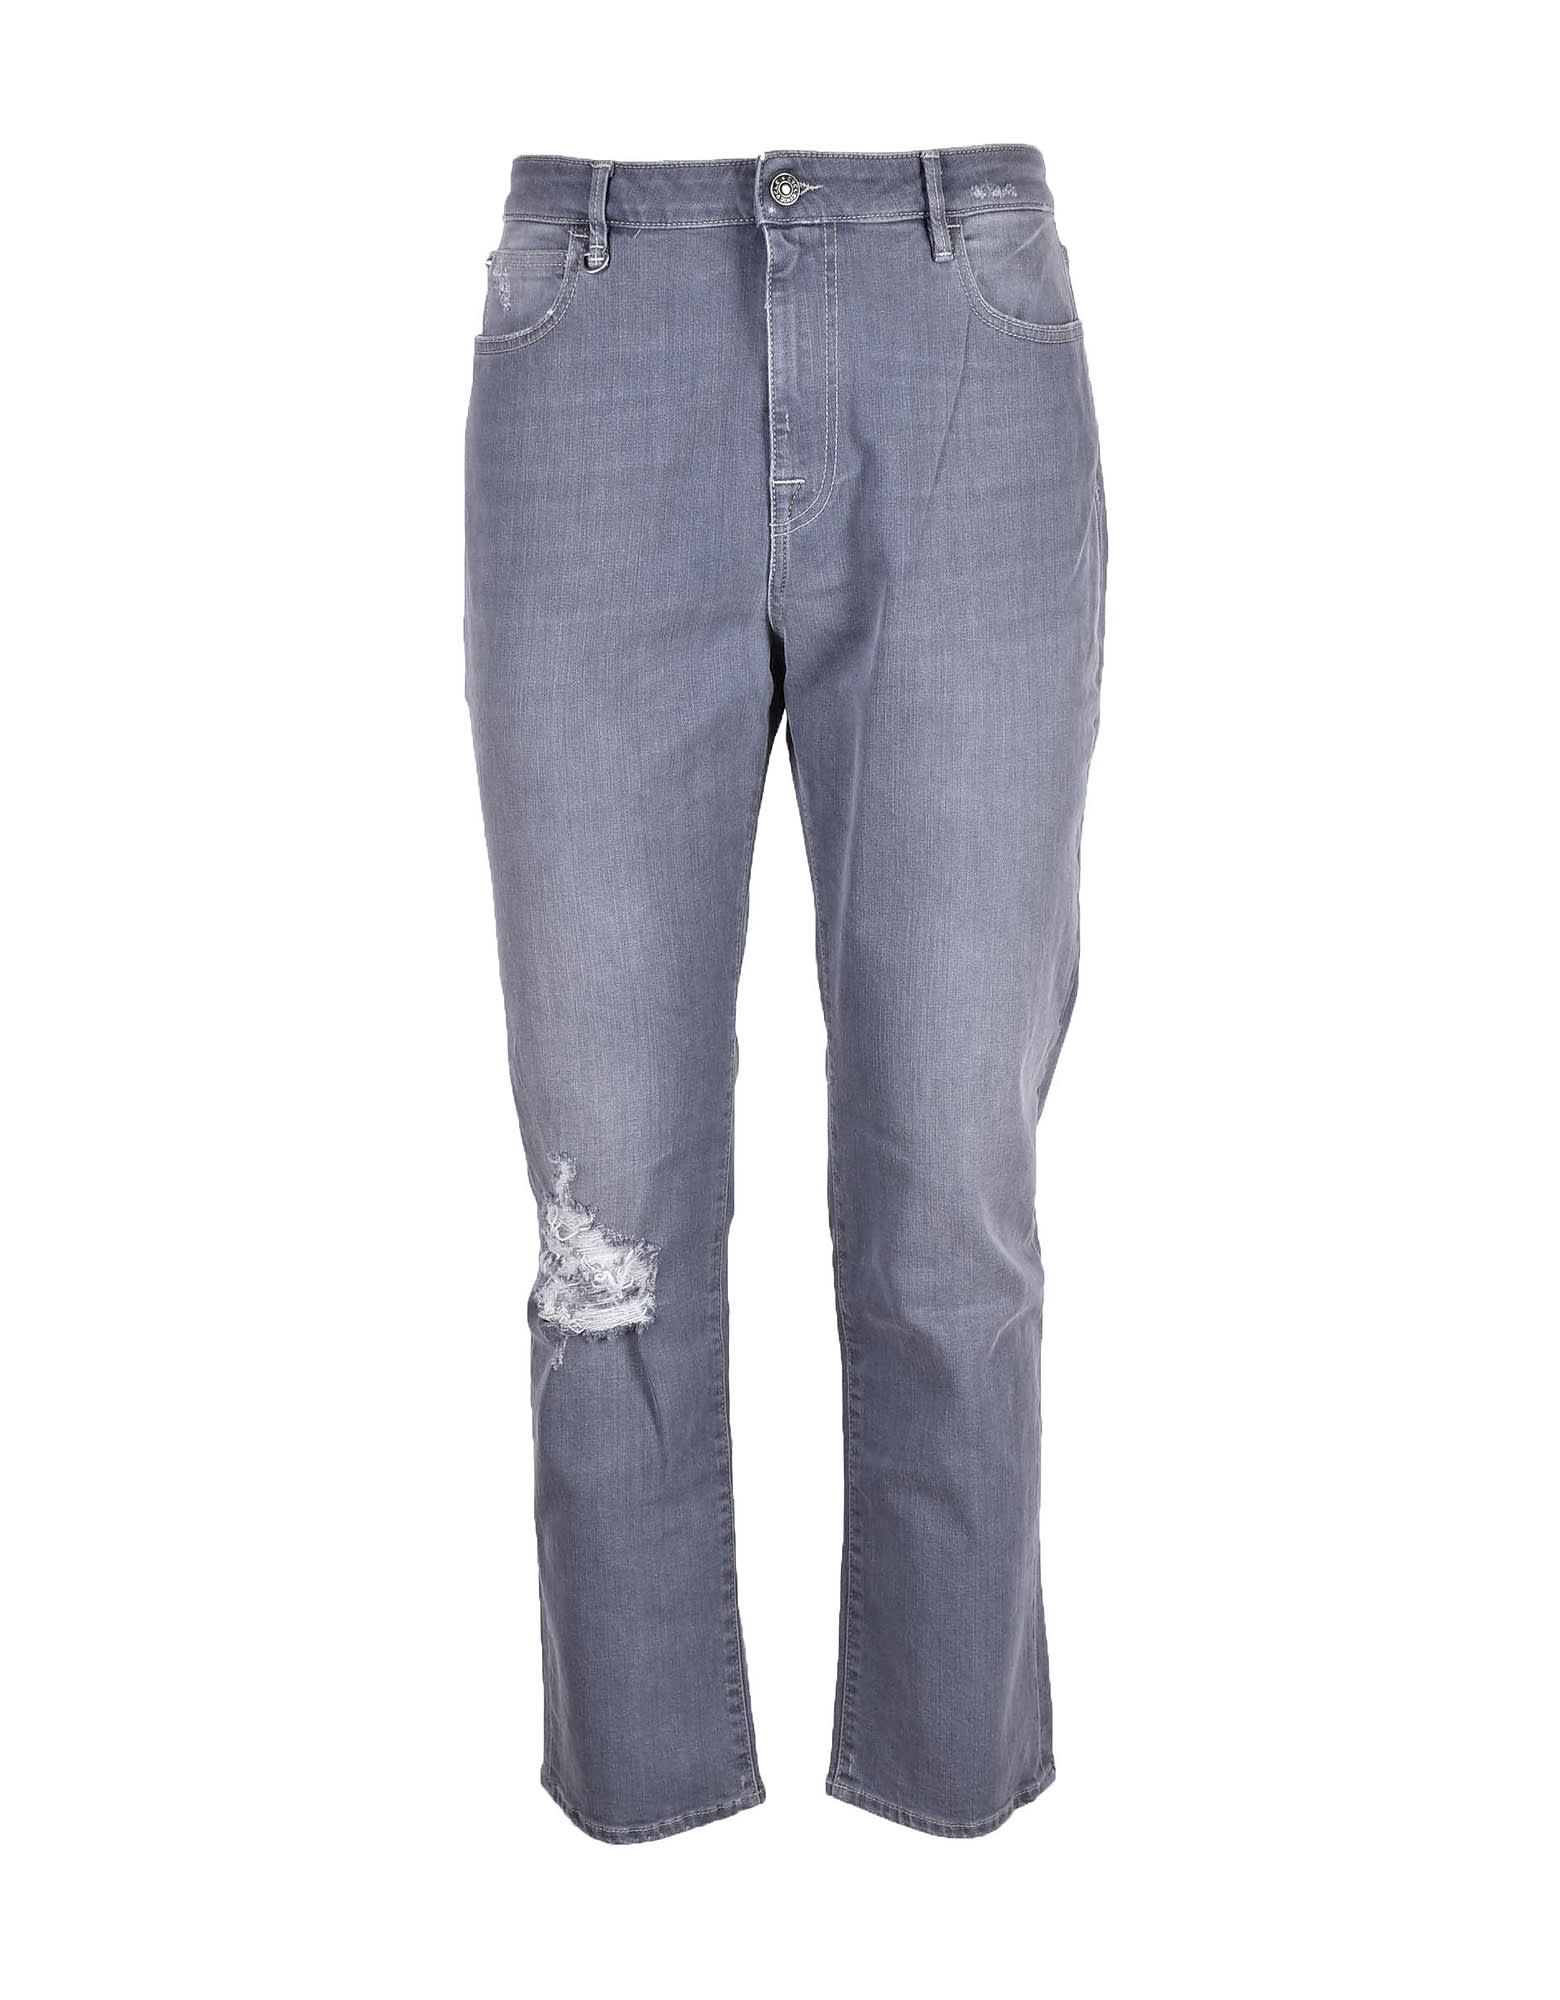 Cycle Mens Gray Jeans